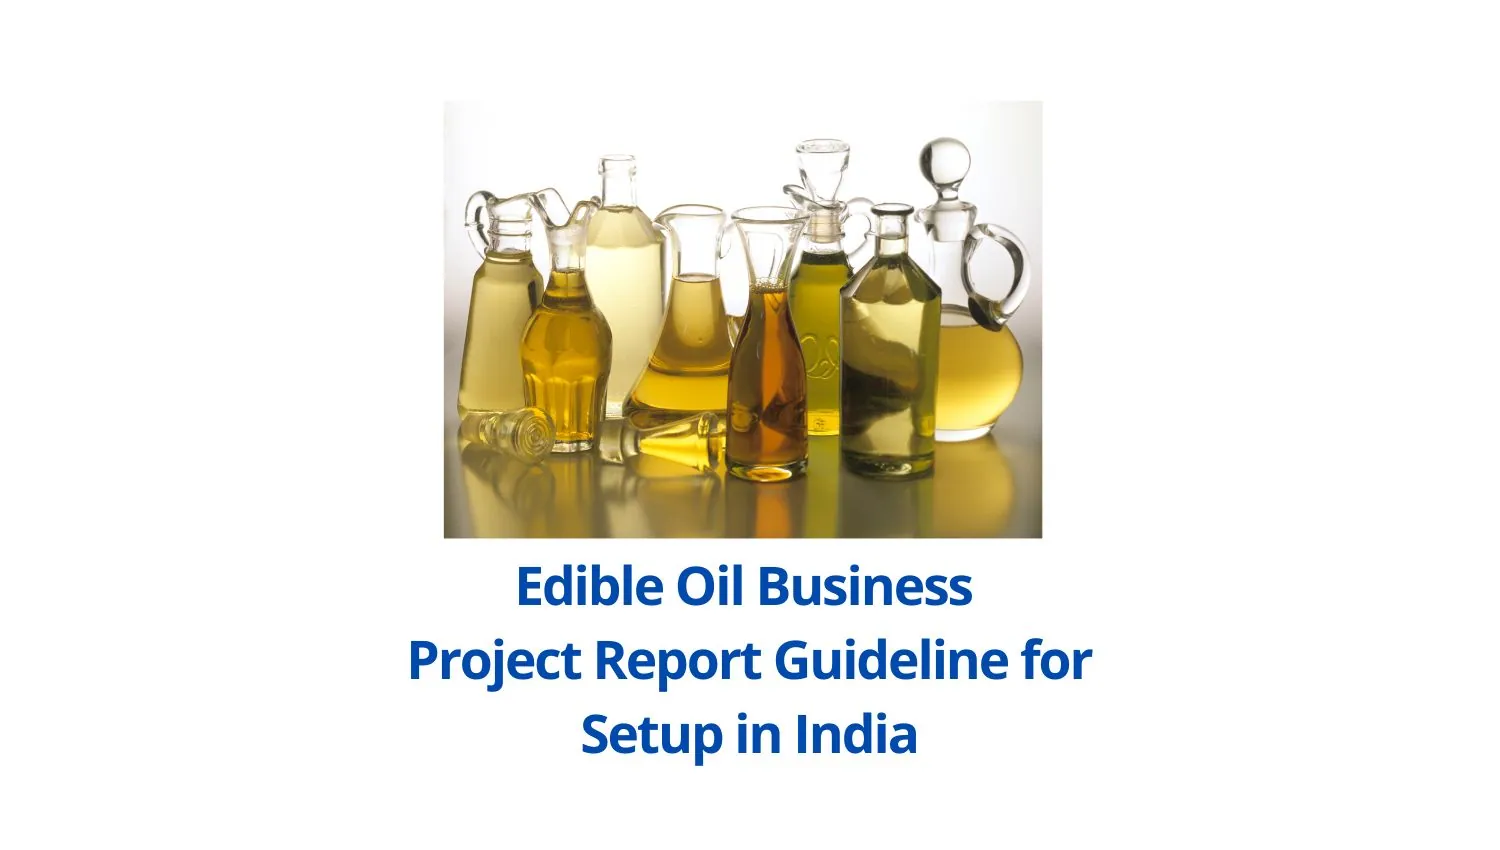 Edible Oil Business Project Report Guideline for Setup in India